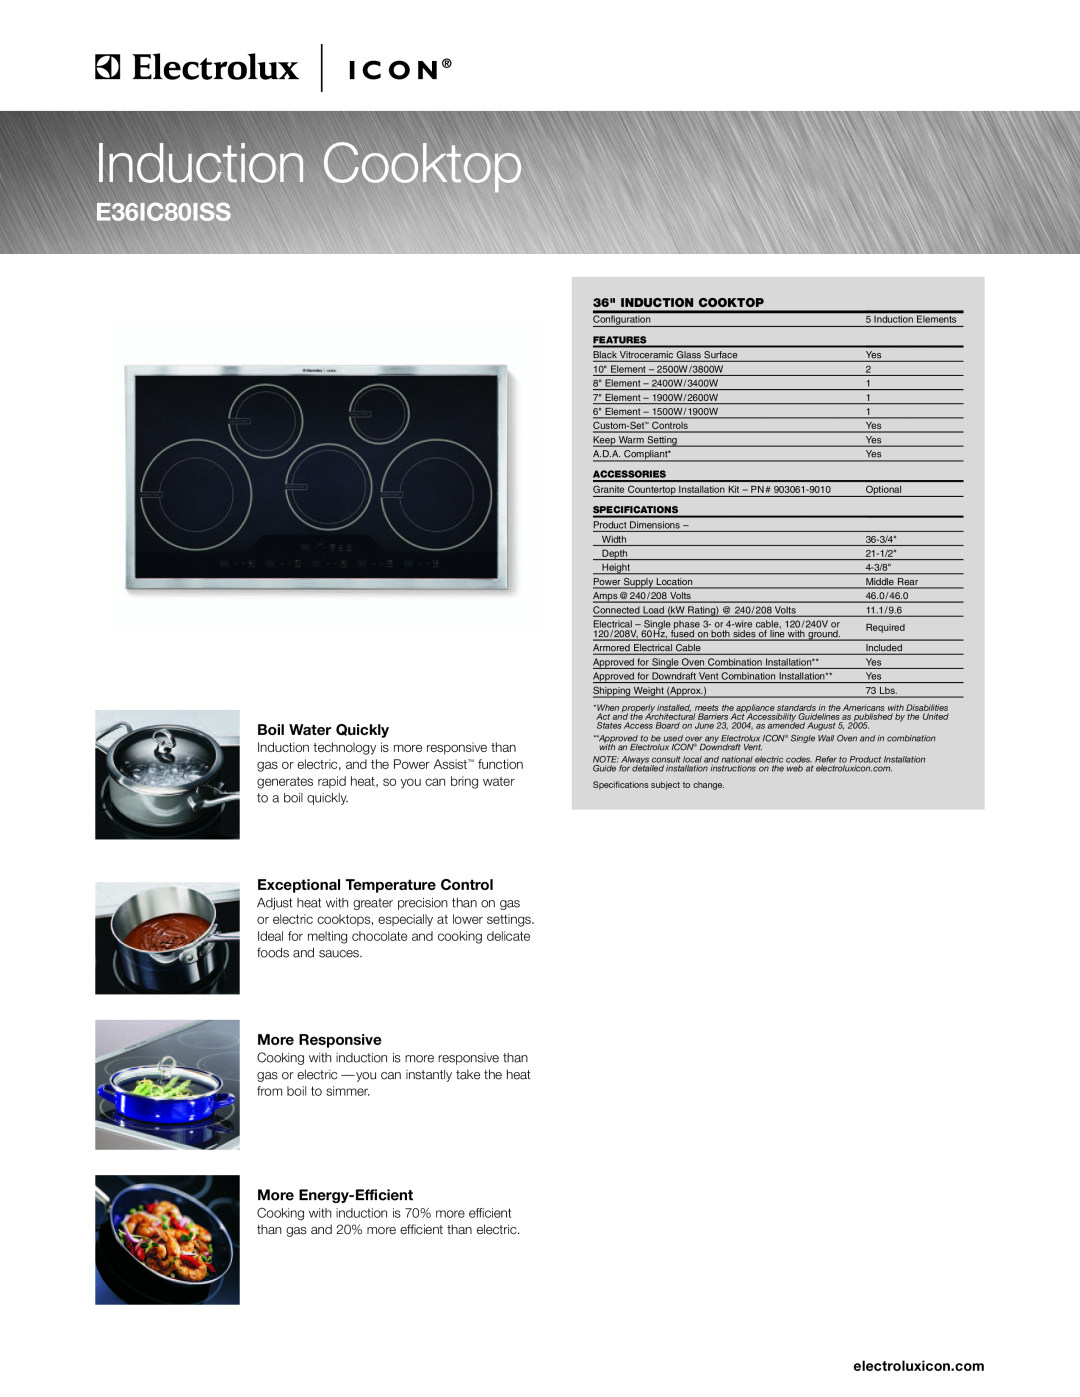 Electrolux E36IC80ISS, E30GC70ISS, E36GC70ISS specifications Induction Cooktop, E30IC80ISS 